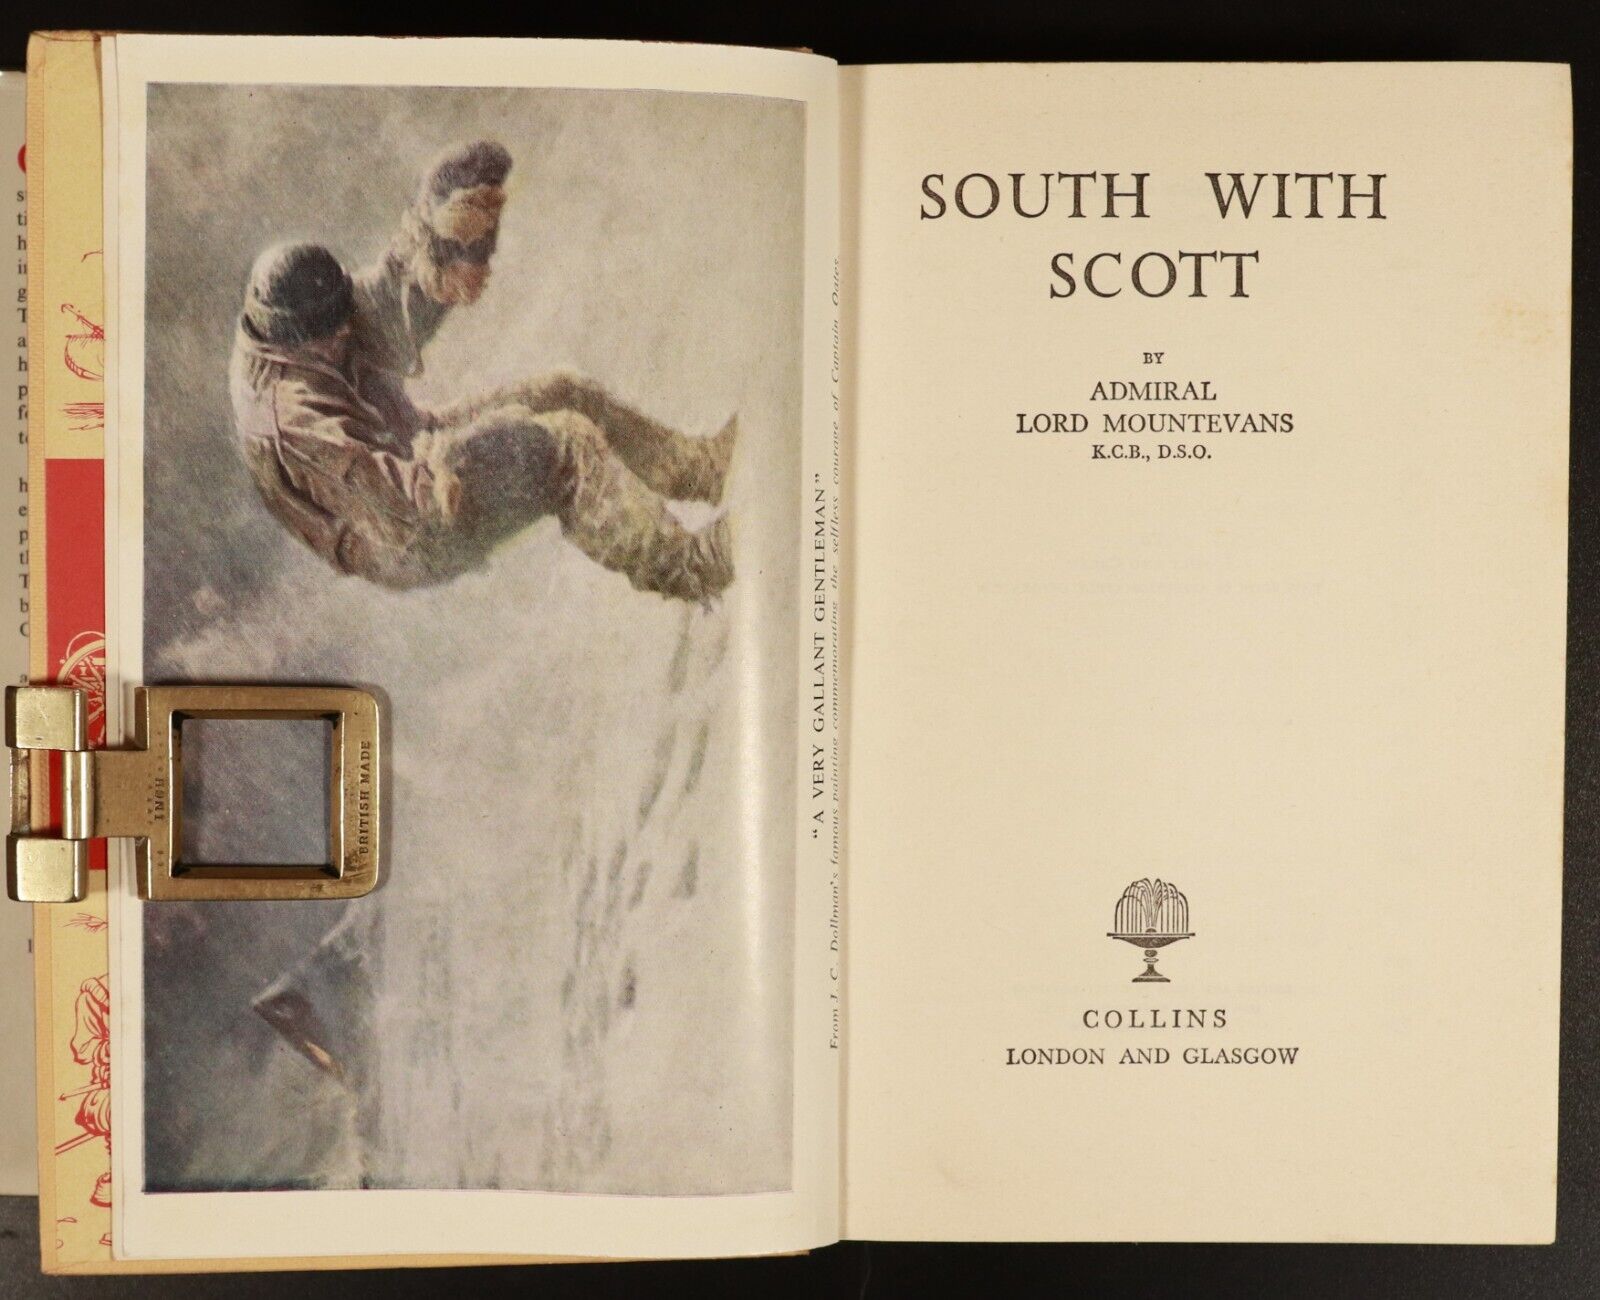 1957 South With Scott by Lord Mountevans 1st Edition Antarctic Exploration Book - 0